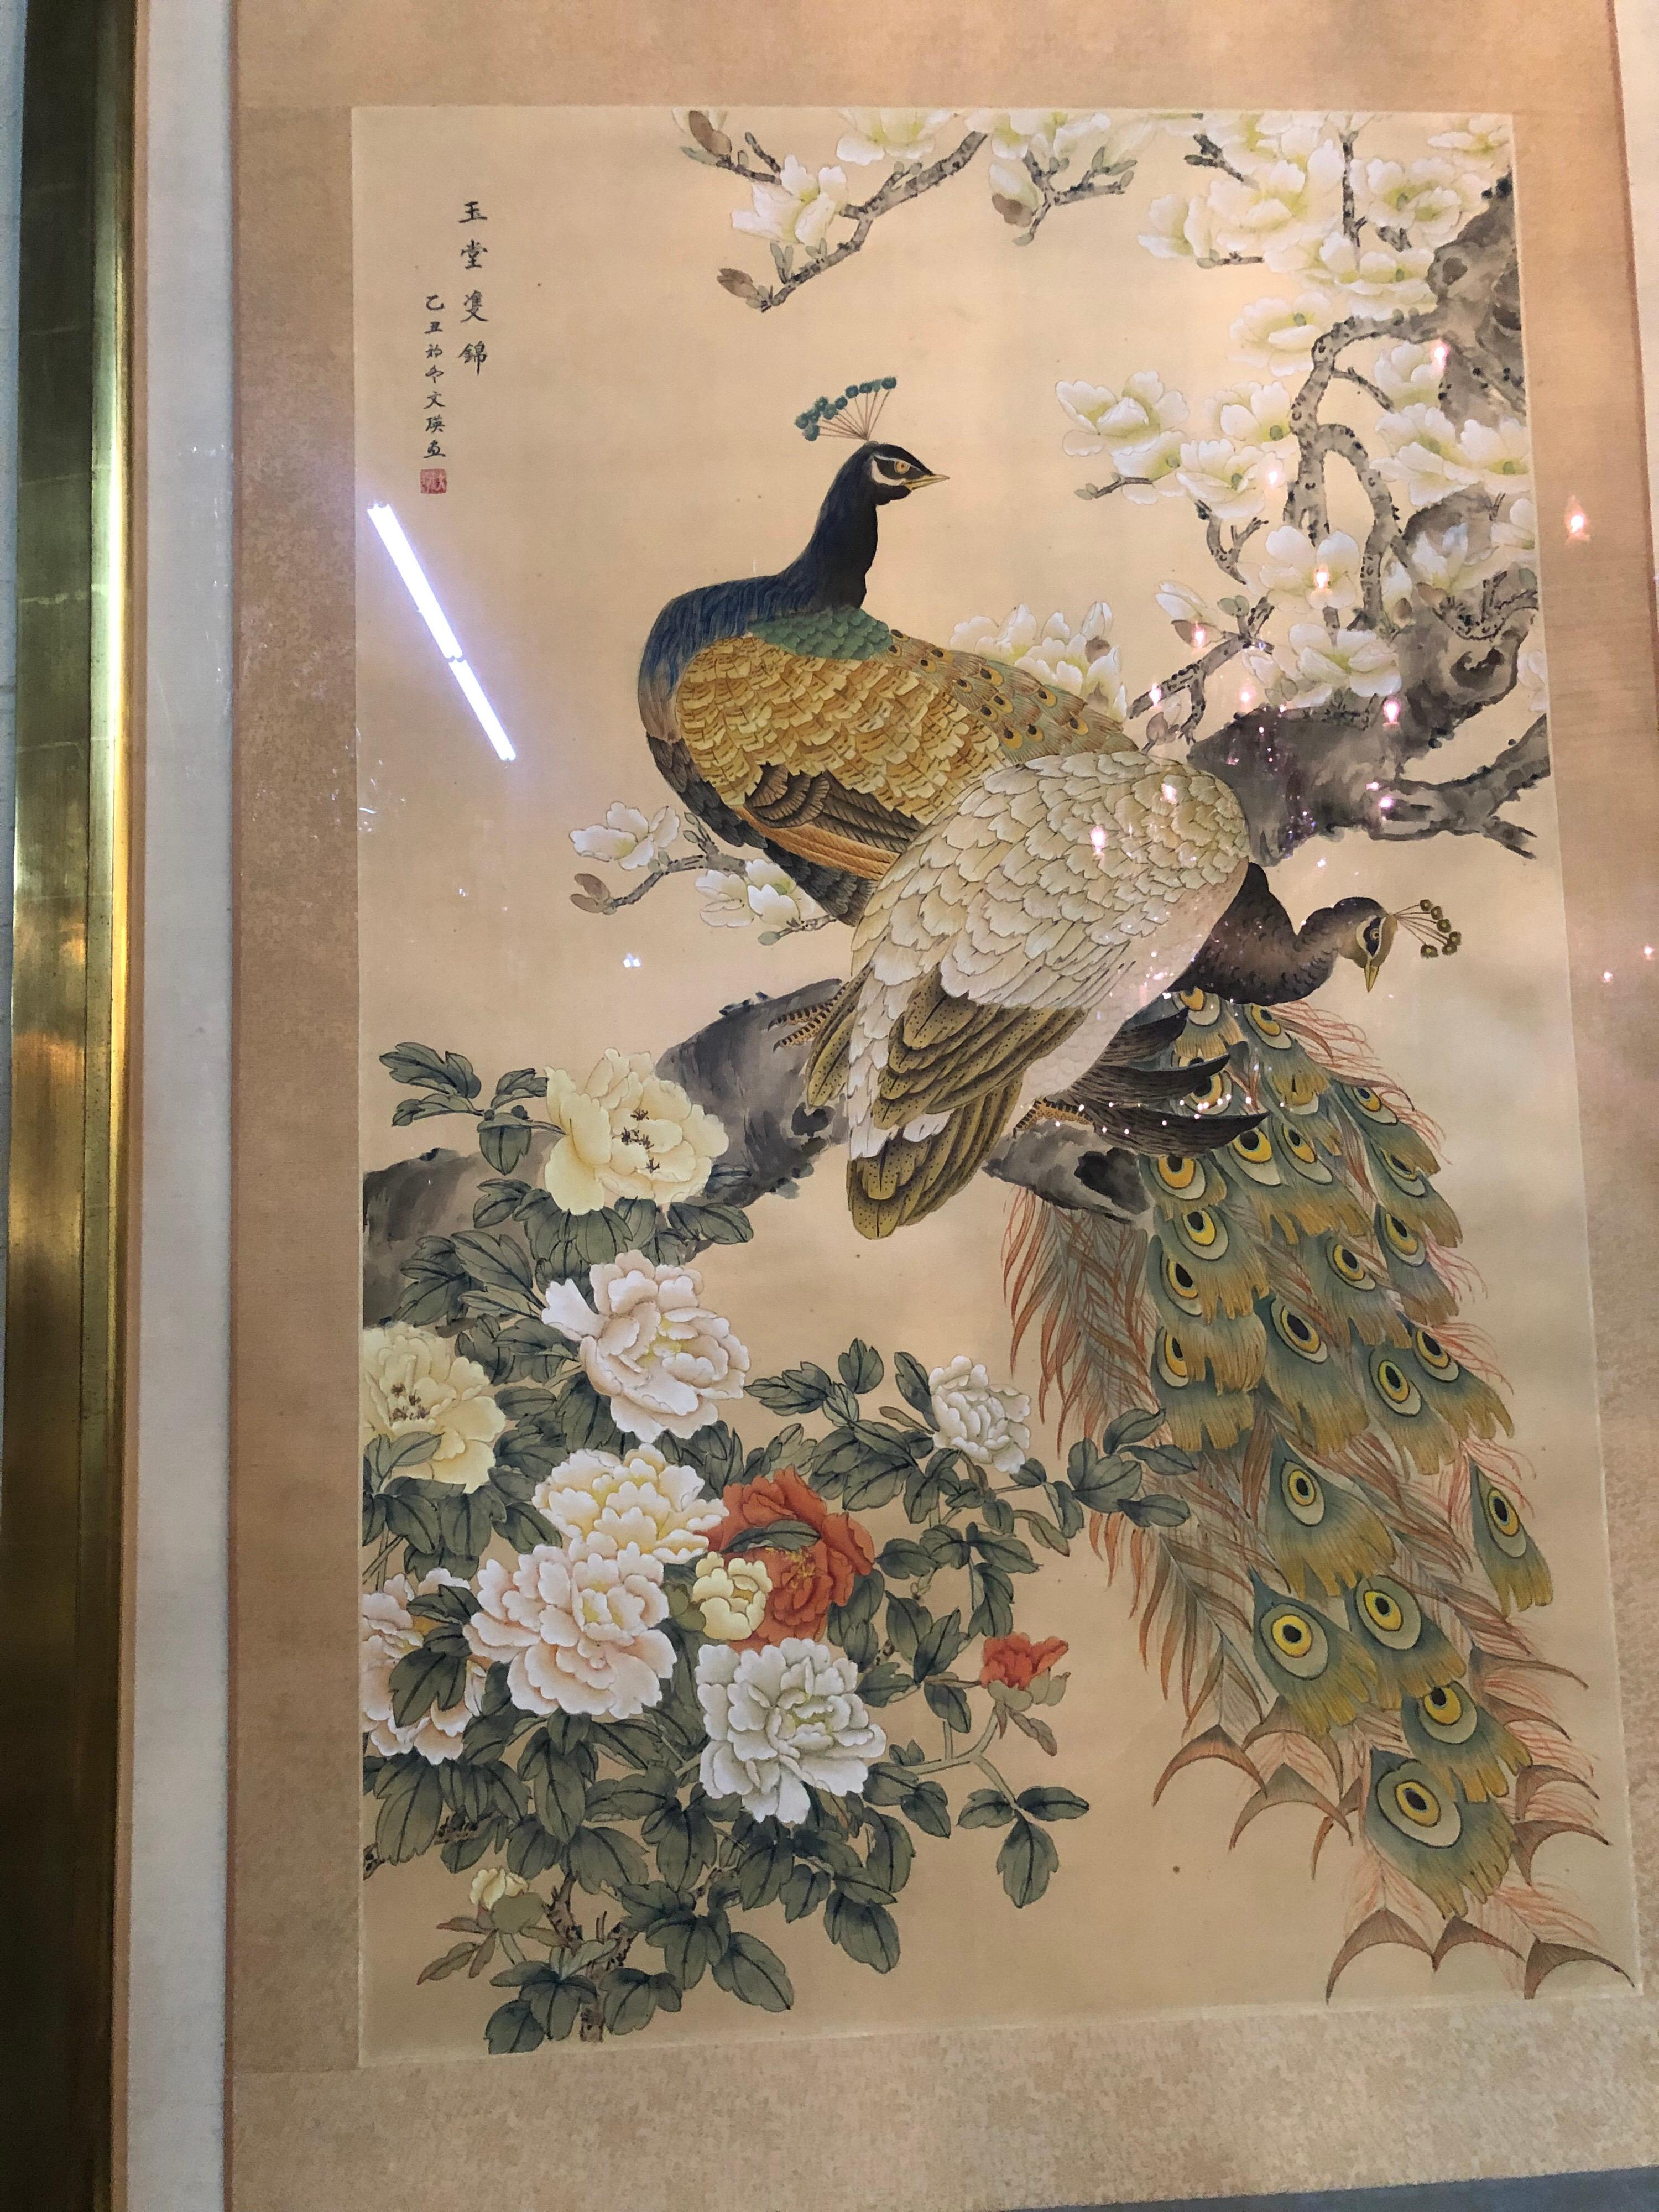 Beautiful Japanese watercolor on lovely silk background. Nicely framed in a gilt shadowbox. Gorgeous!